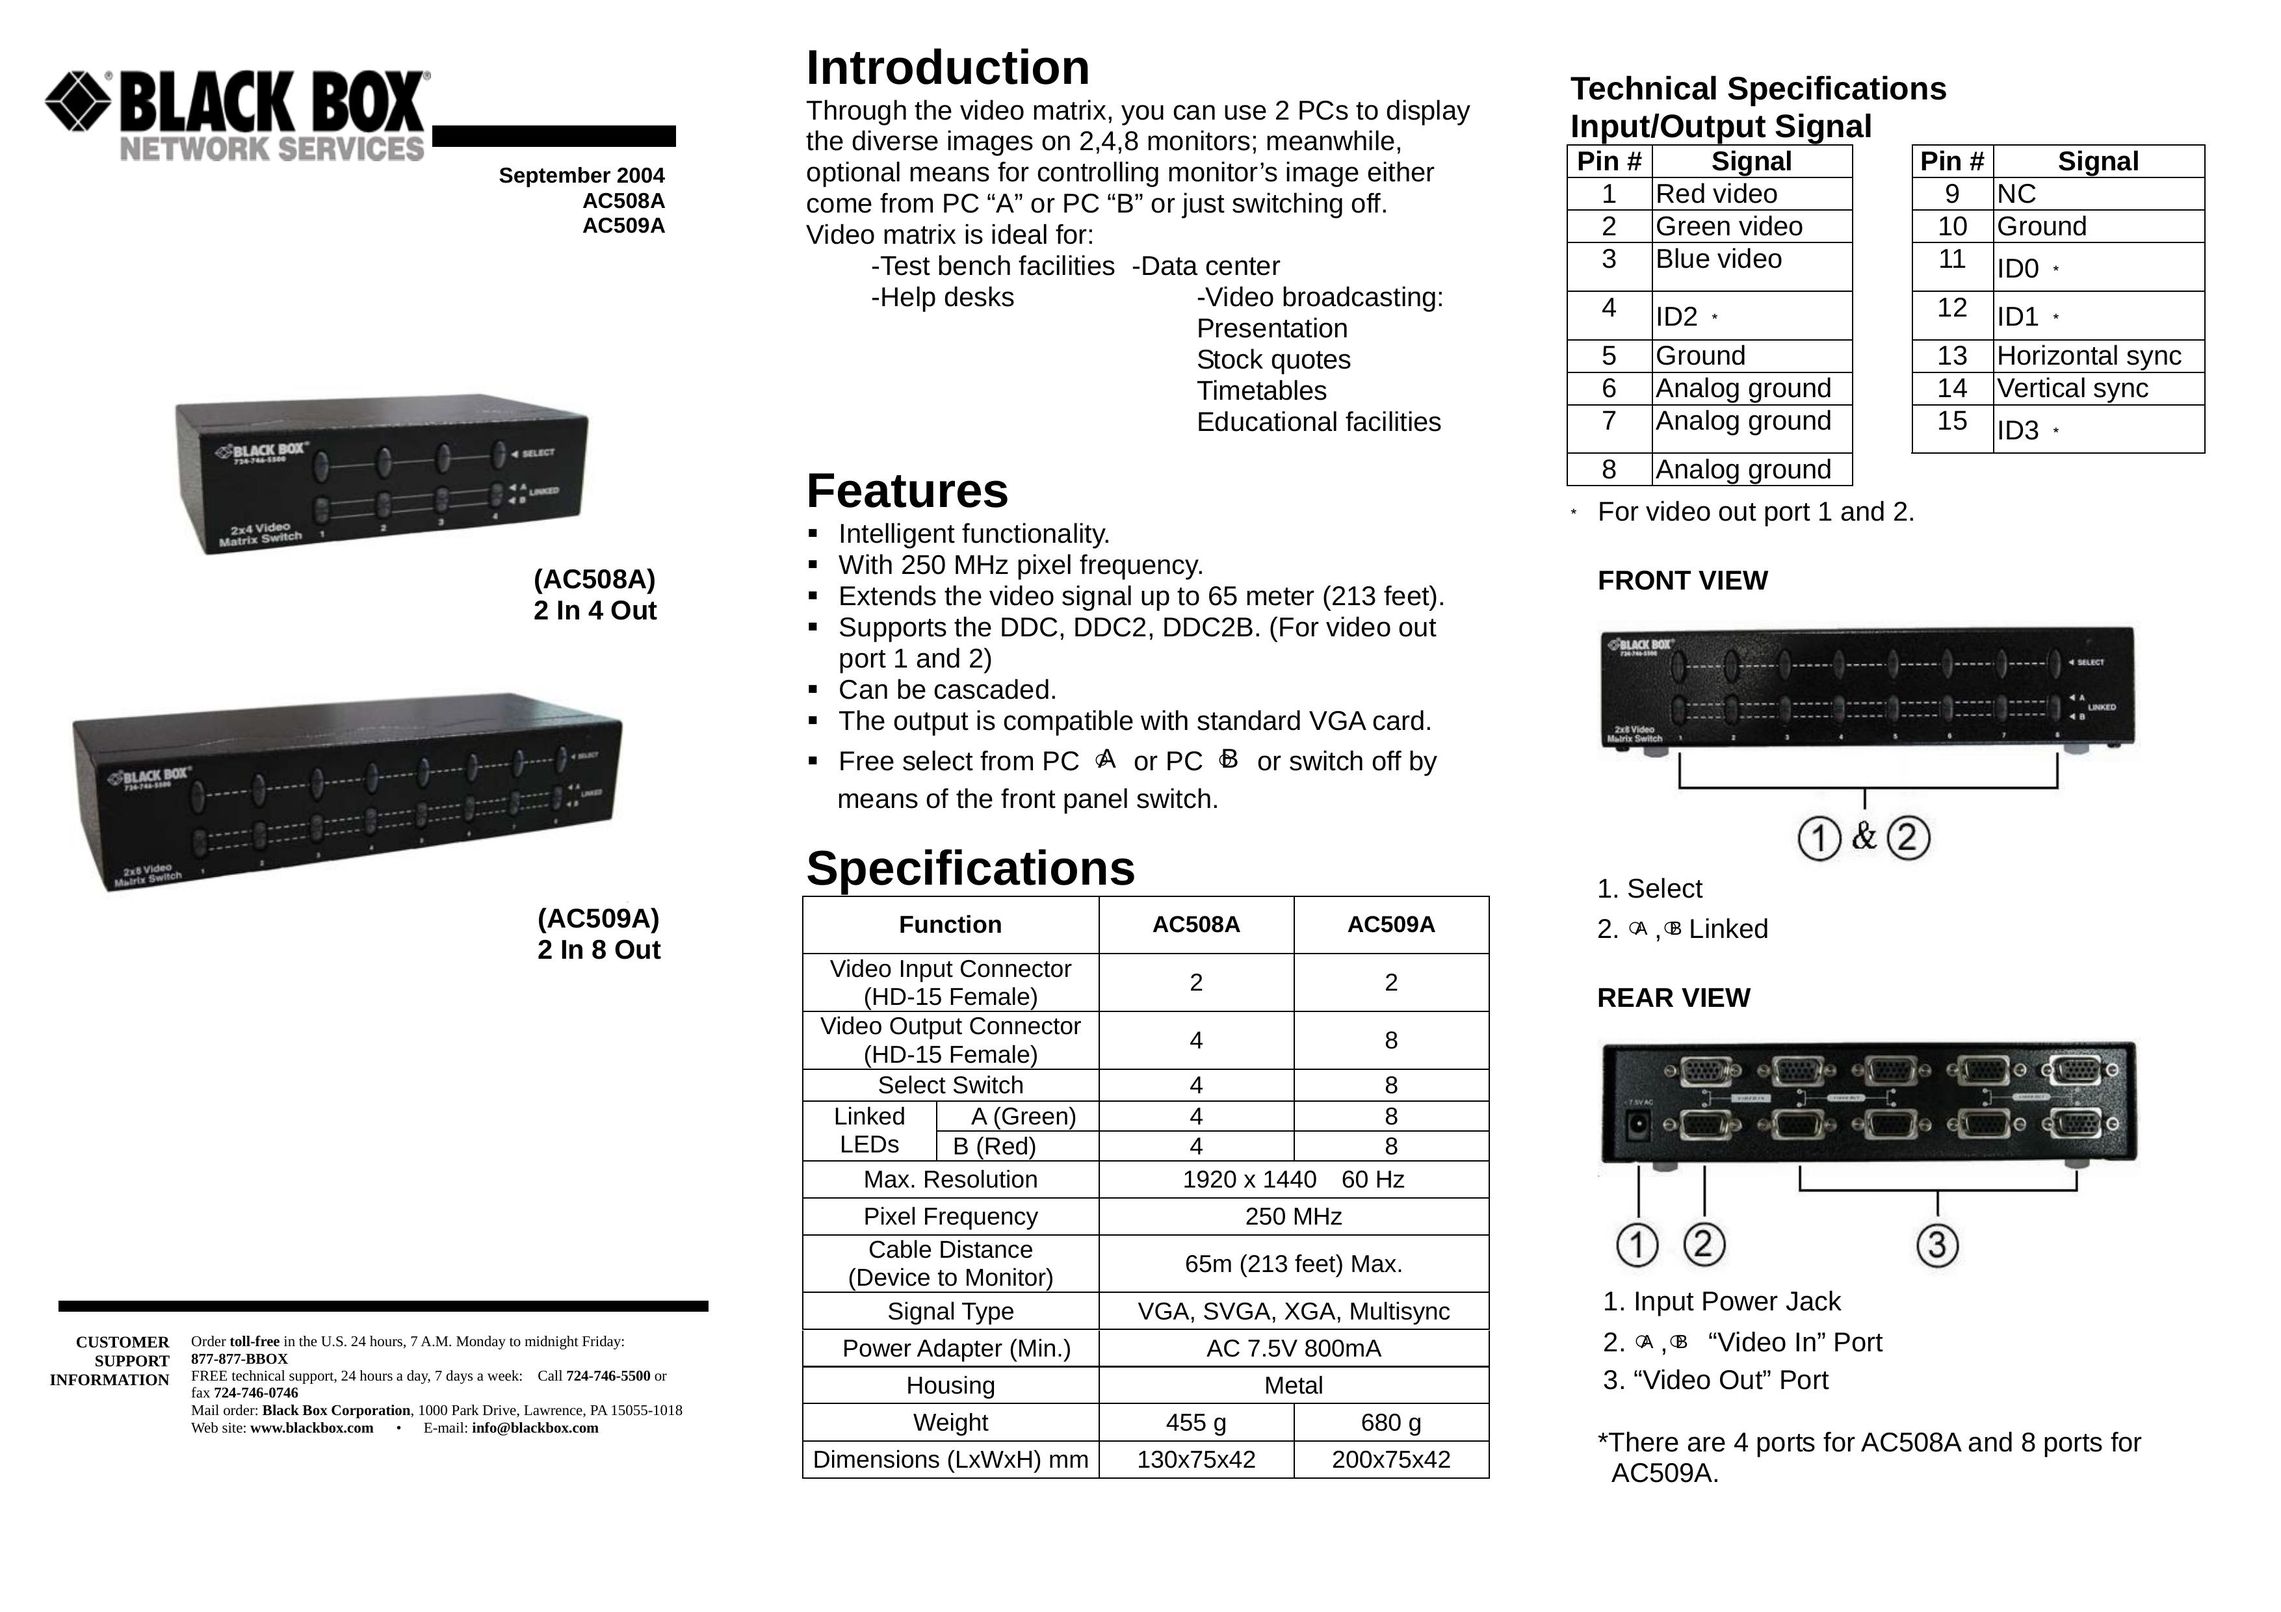 Black Box AC509A Network Router User Manual